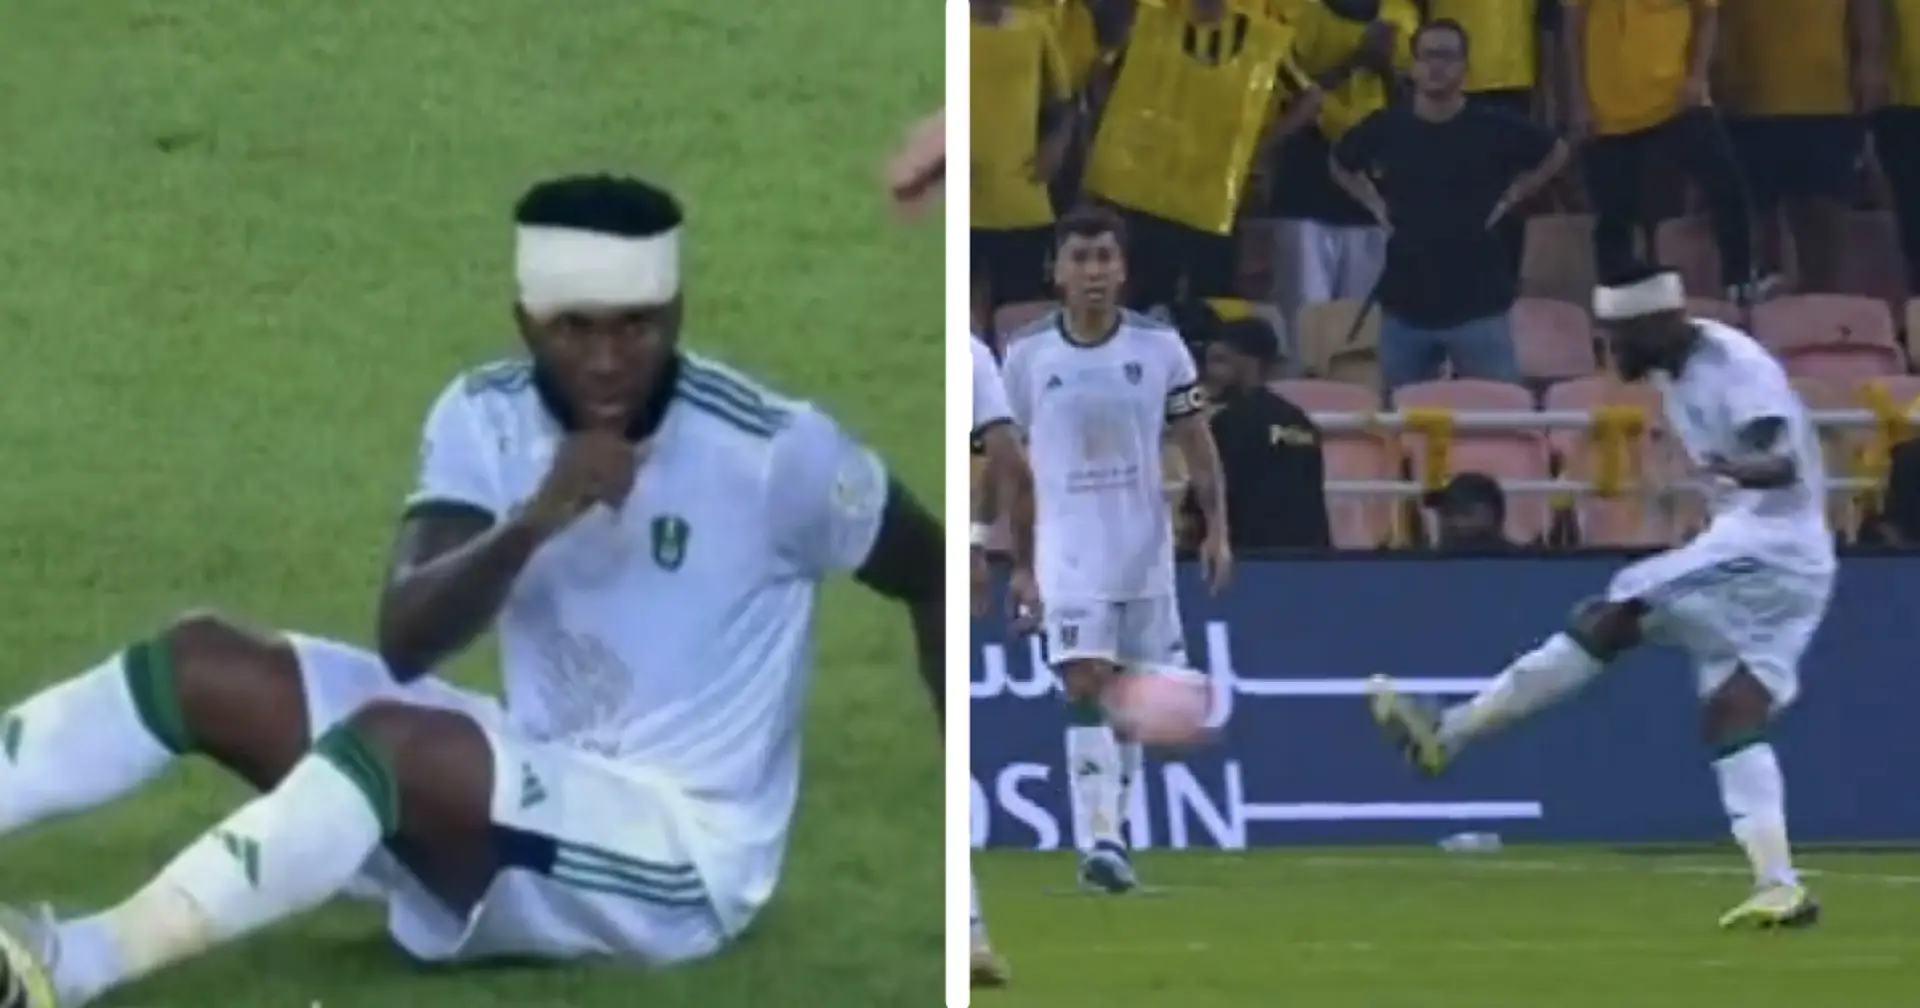 Kessie scores moments after suffering head collision – he's got 4 goals in 10 games